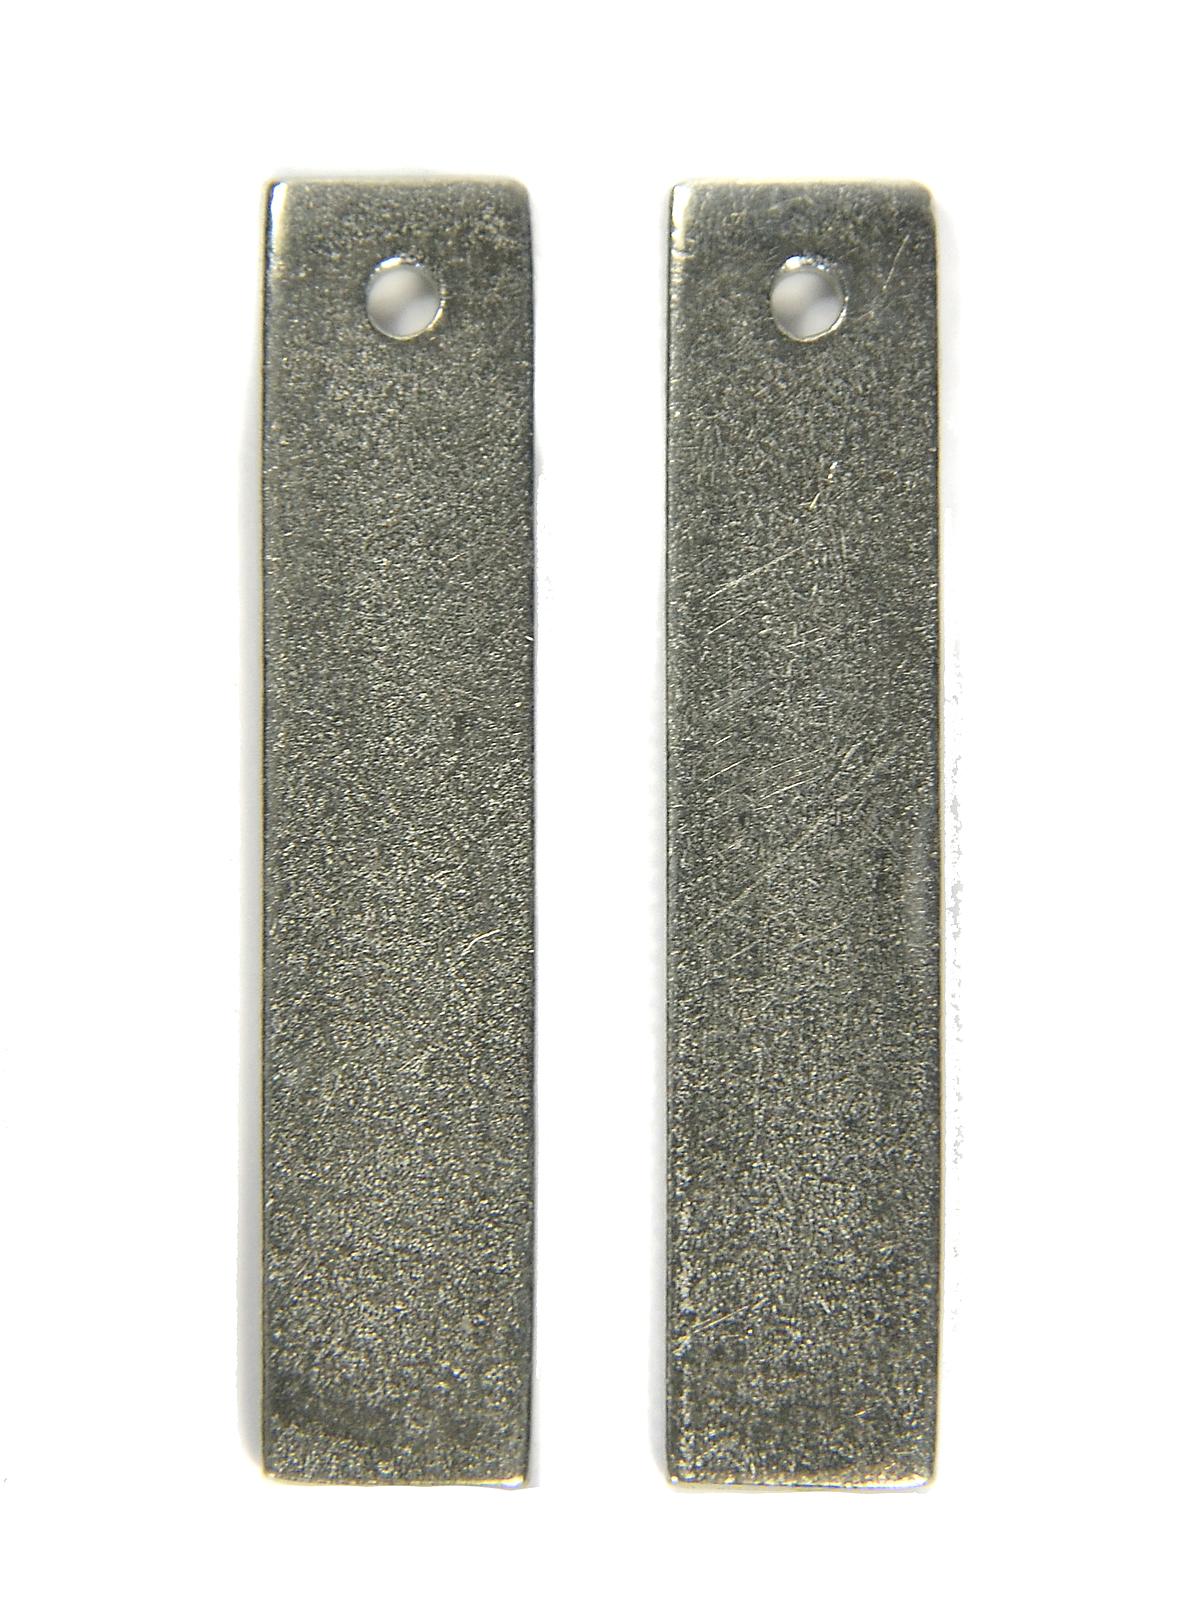 Pewter Metal Blanks Rectangle 1 1 2 In. X 5 16 In. Pack Of 2